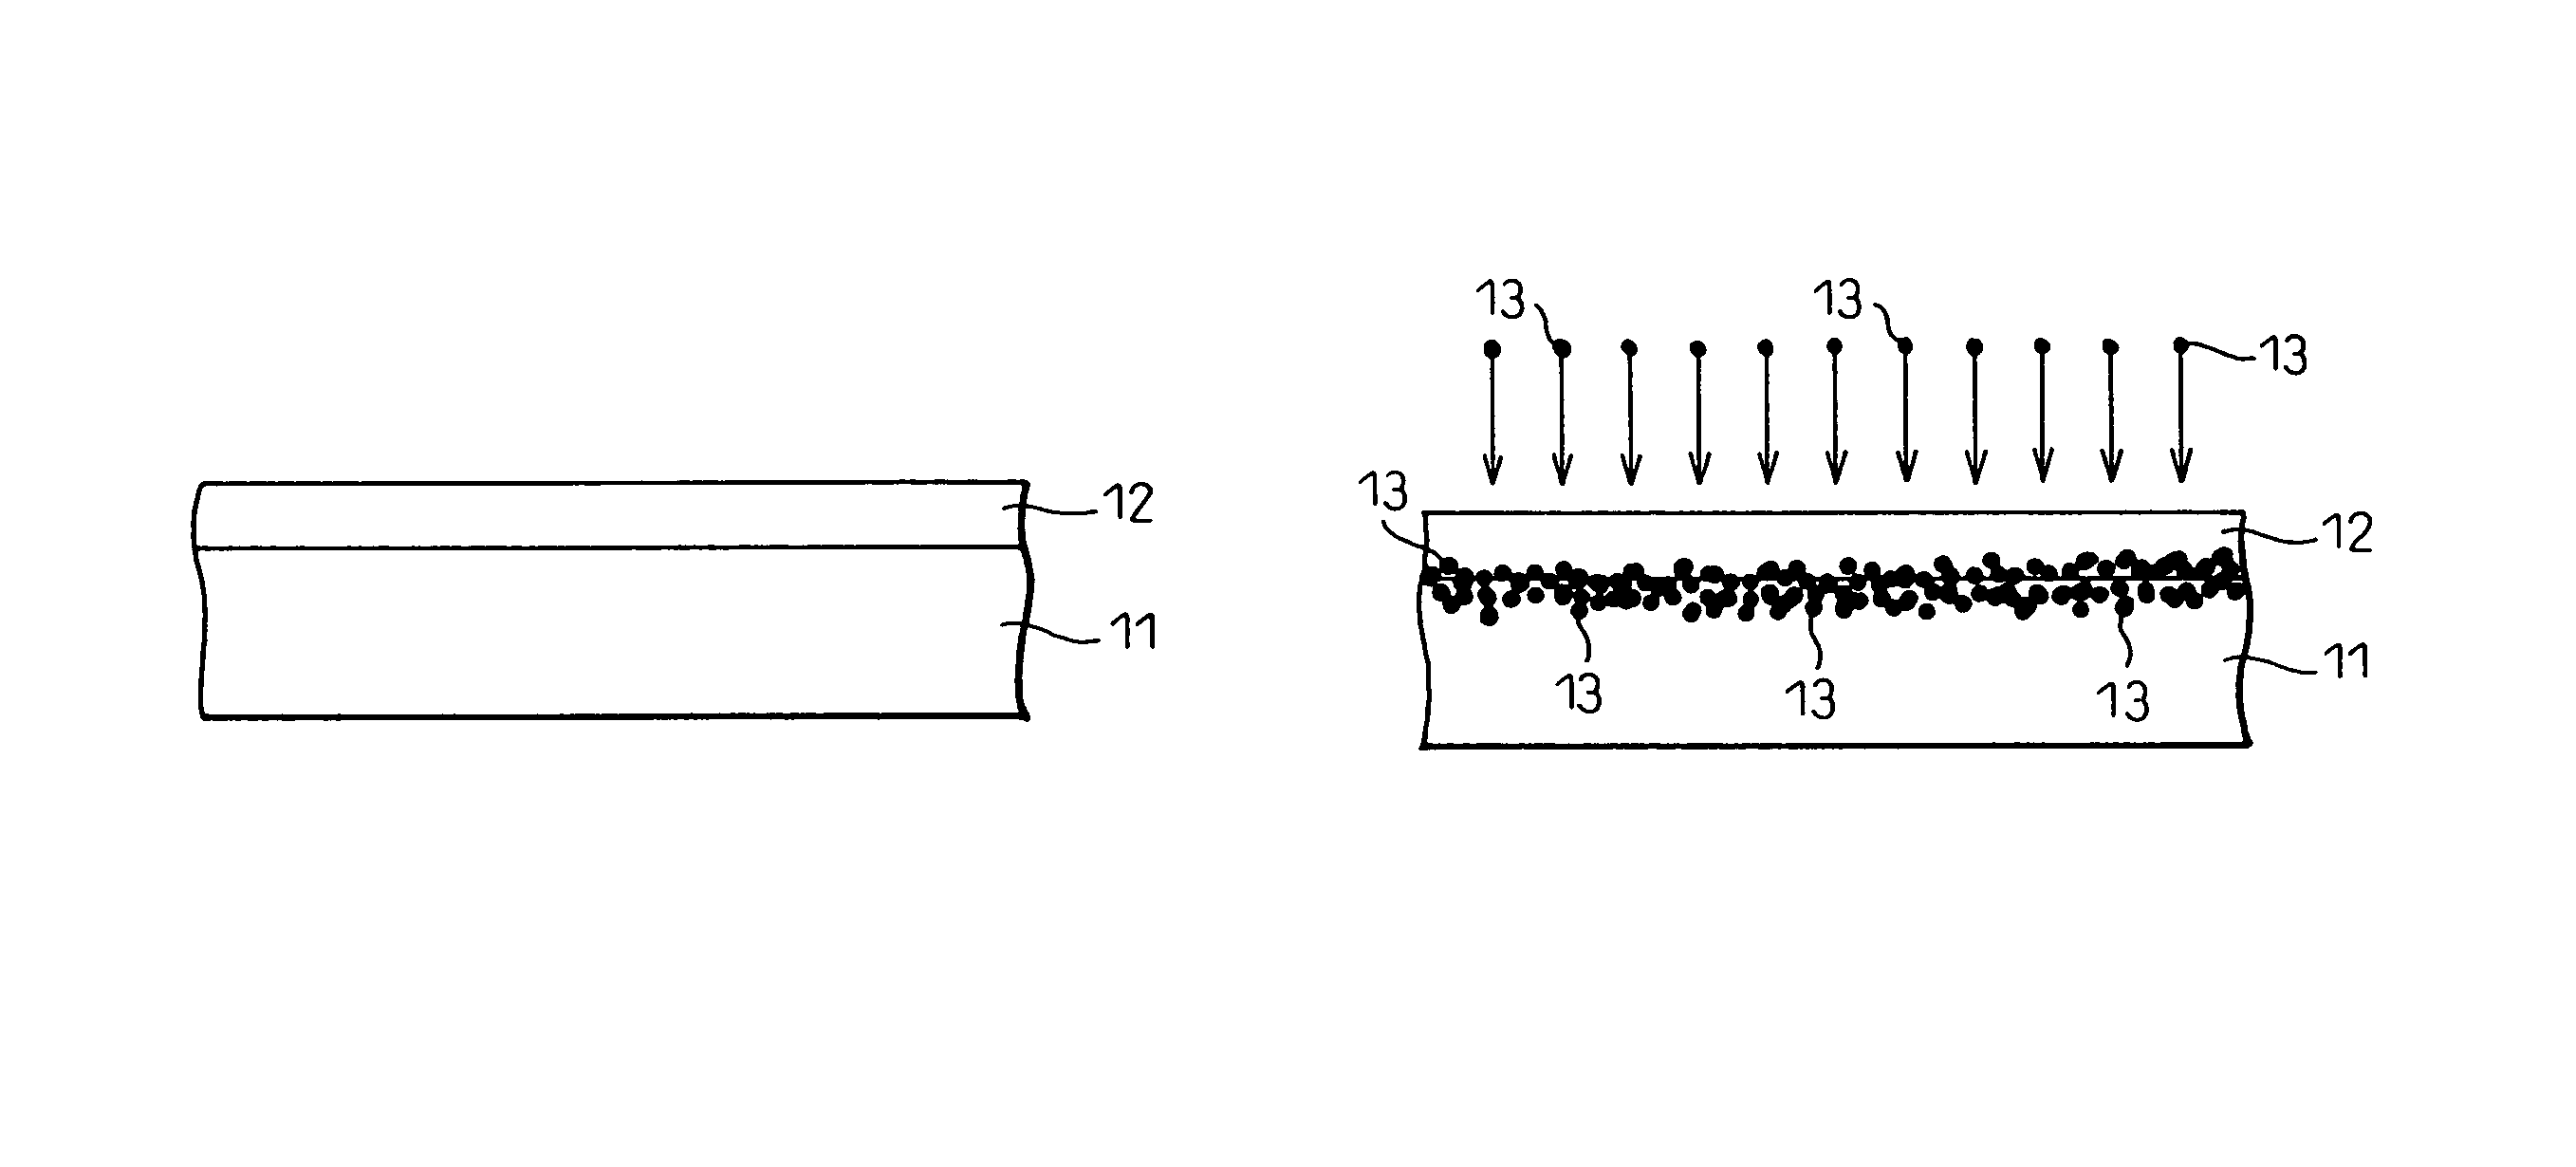 Method of manufacturing carbon cylindrical structures and biopolymer detection device